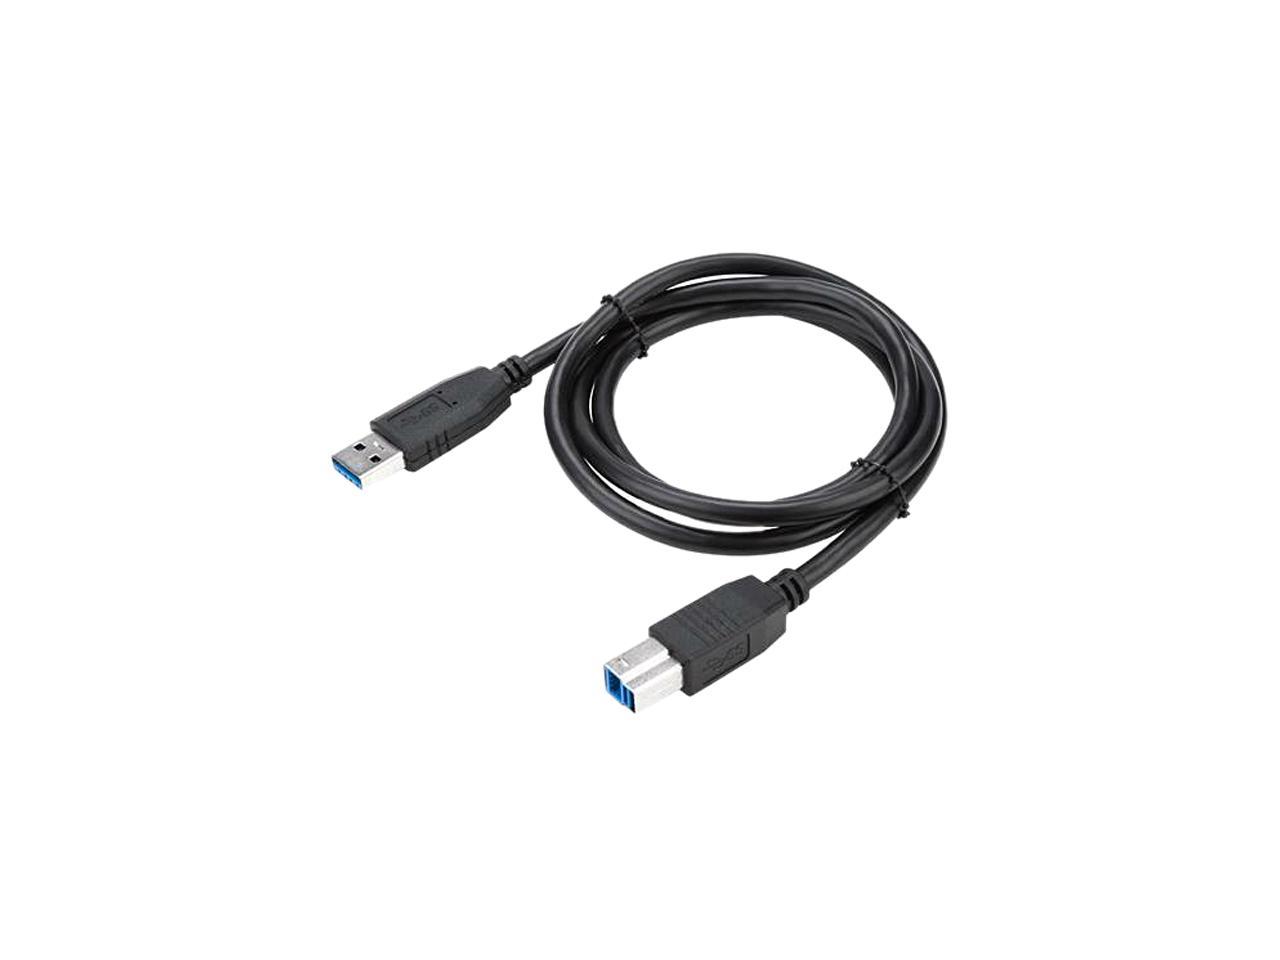 Targus 1-Meter USB 3.0 A to B Cable - ACC987USX